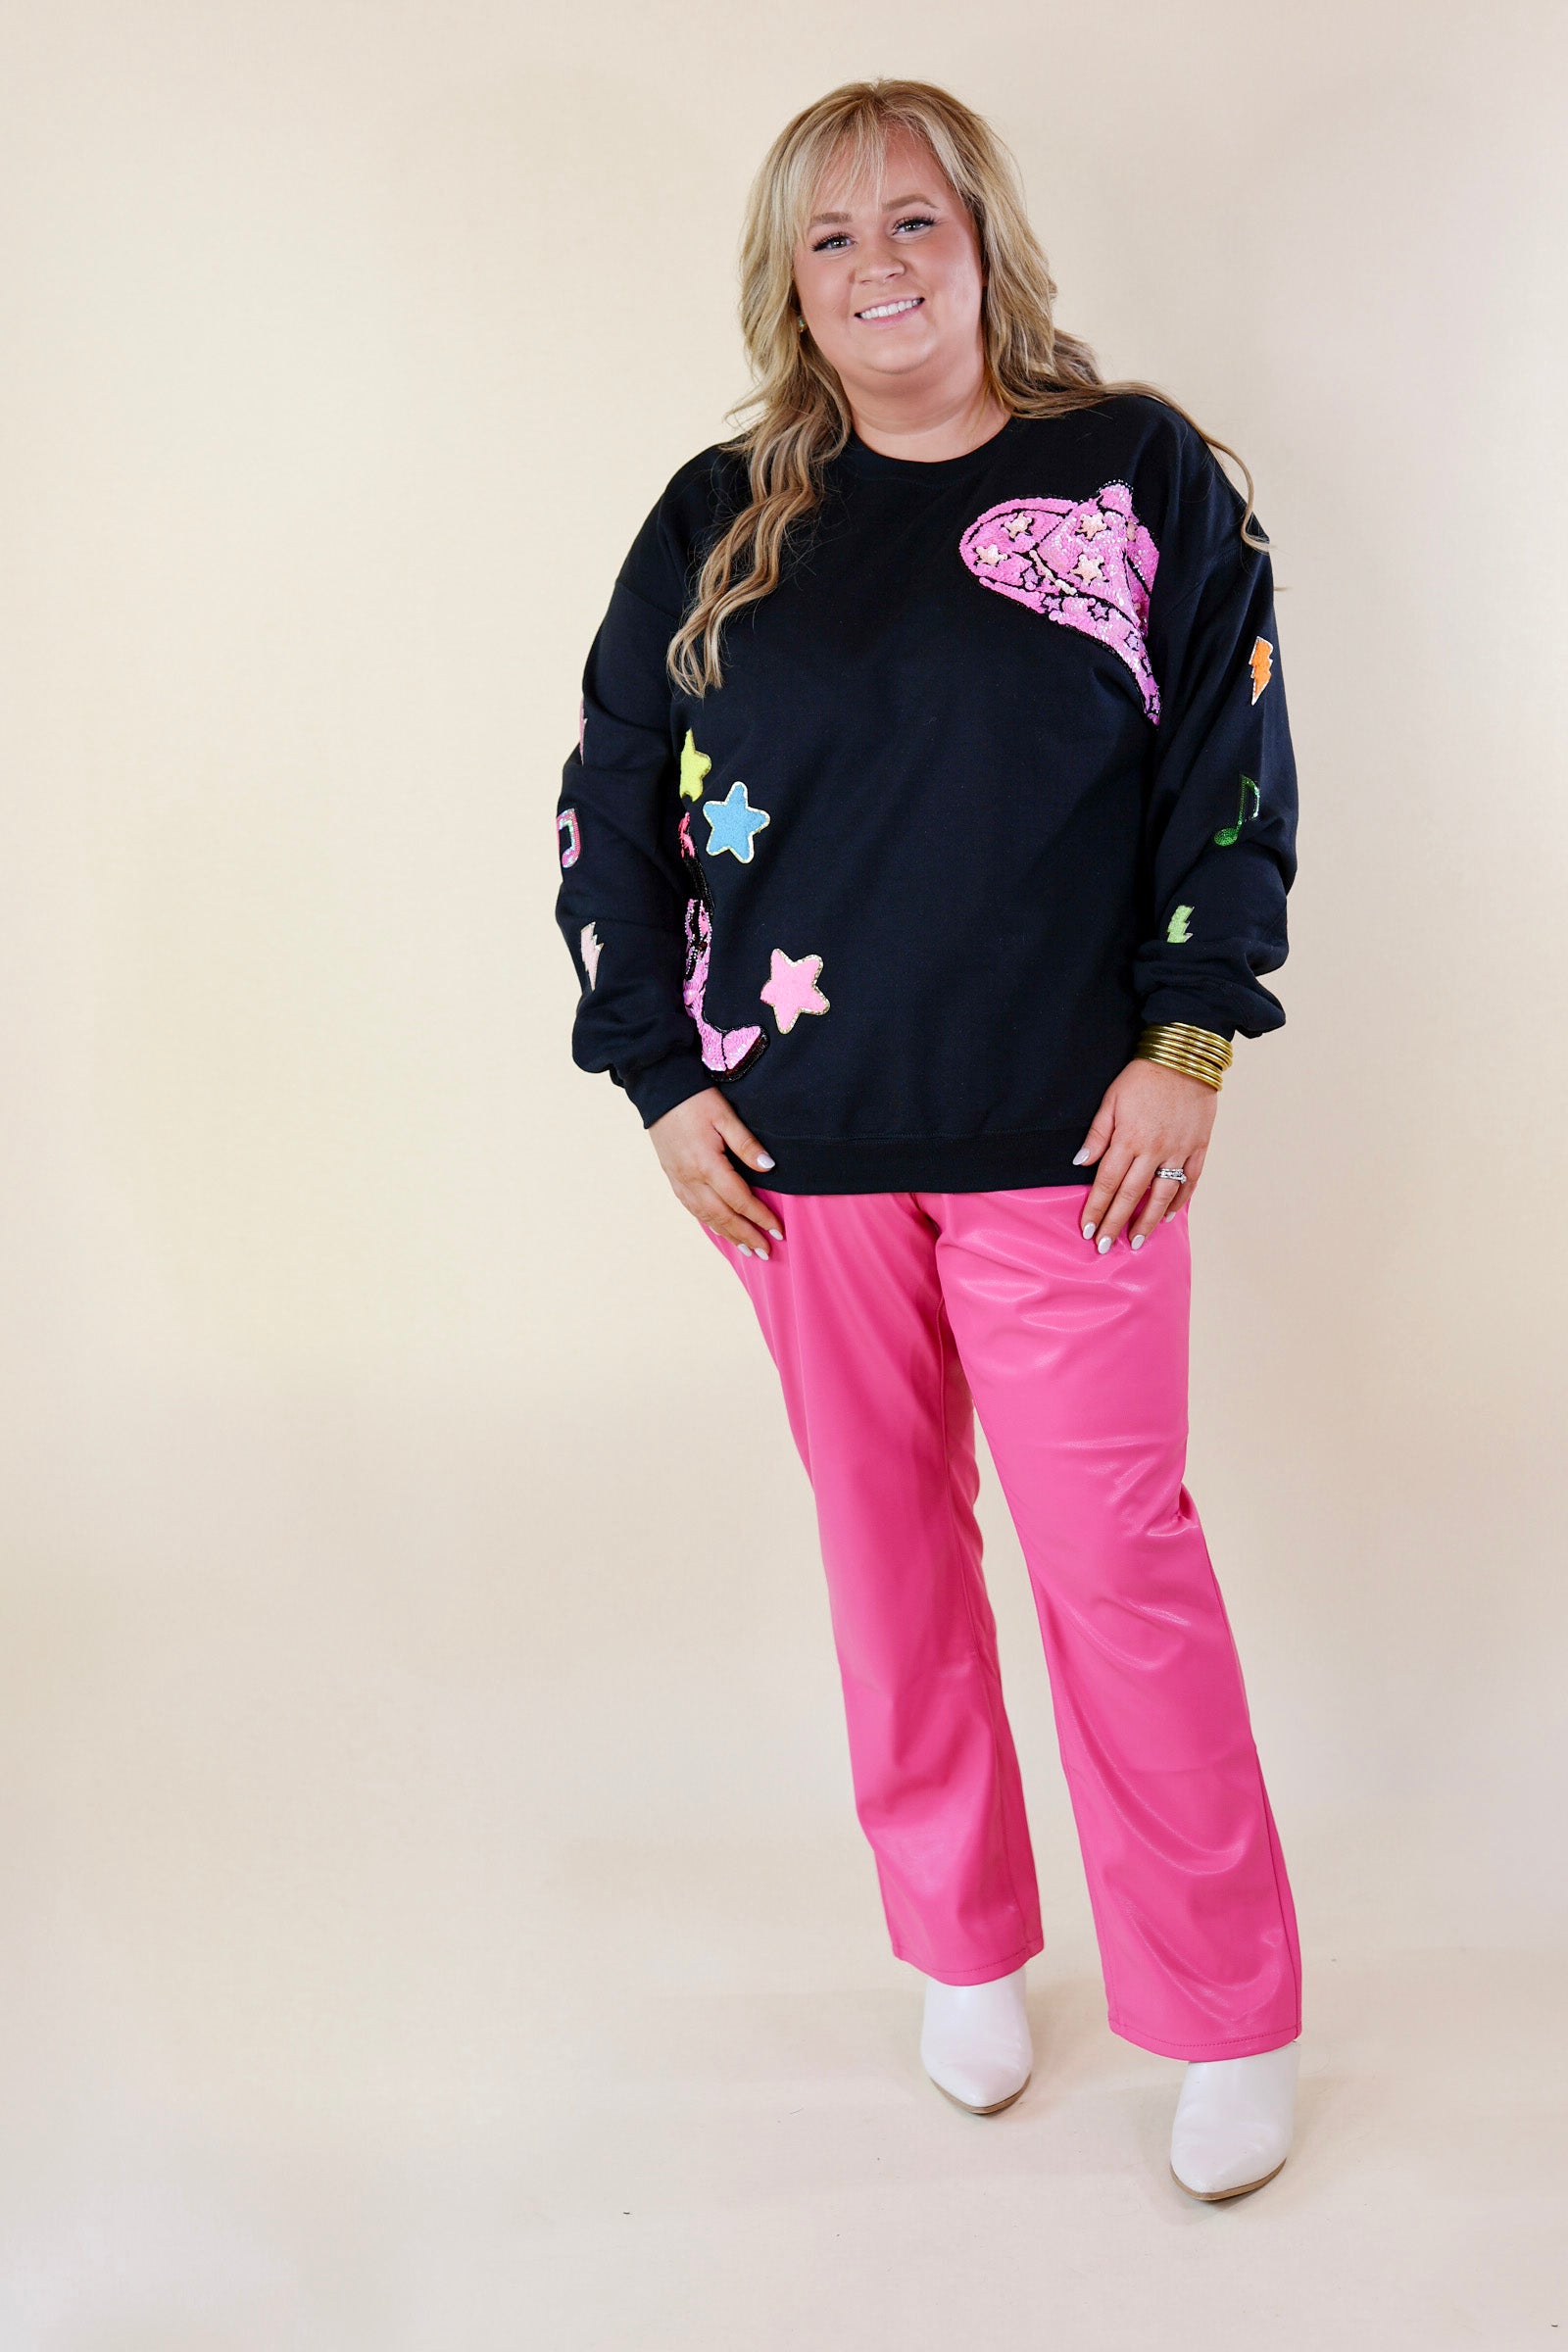 Nashville Lights Chenille and Sequin Patch Graphic Sweatshirt in Black - Giddy Up Glamour Boutique